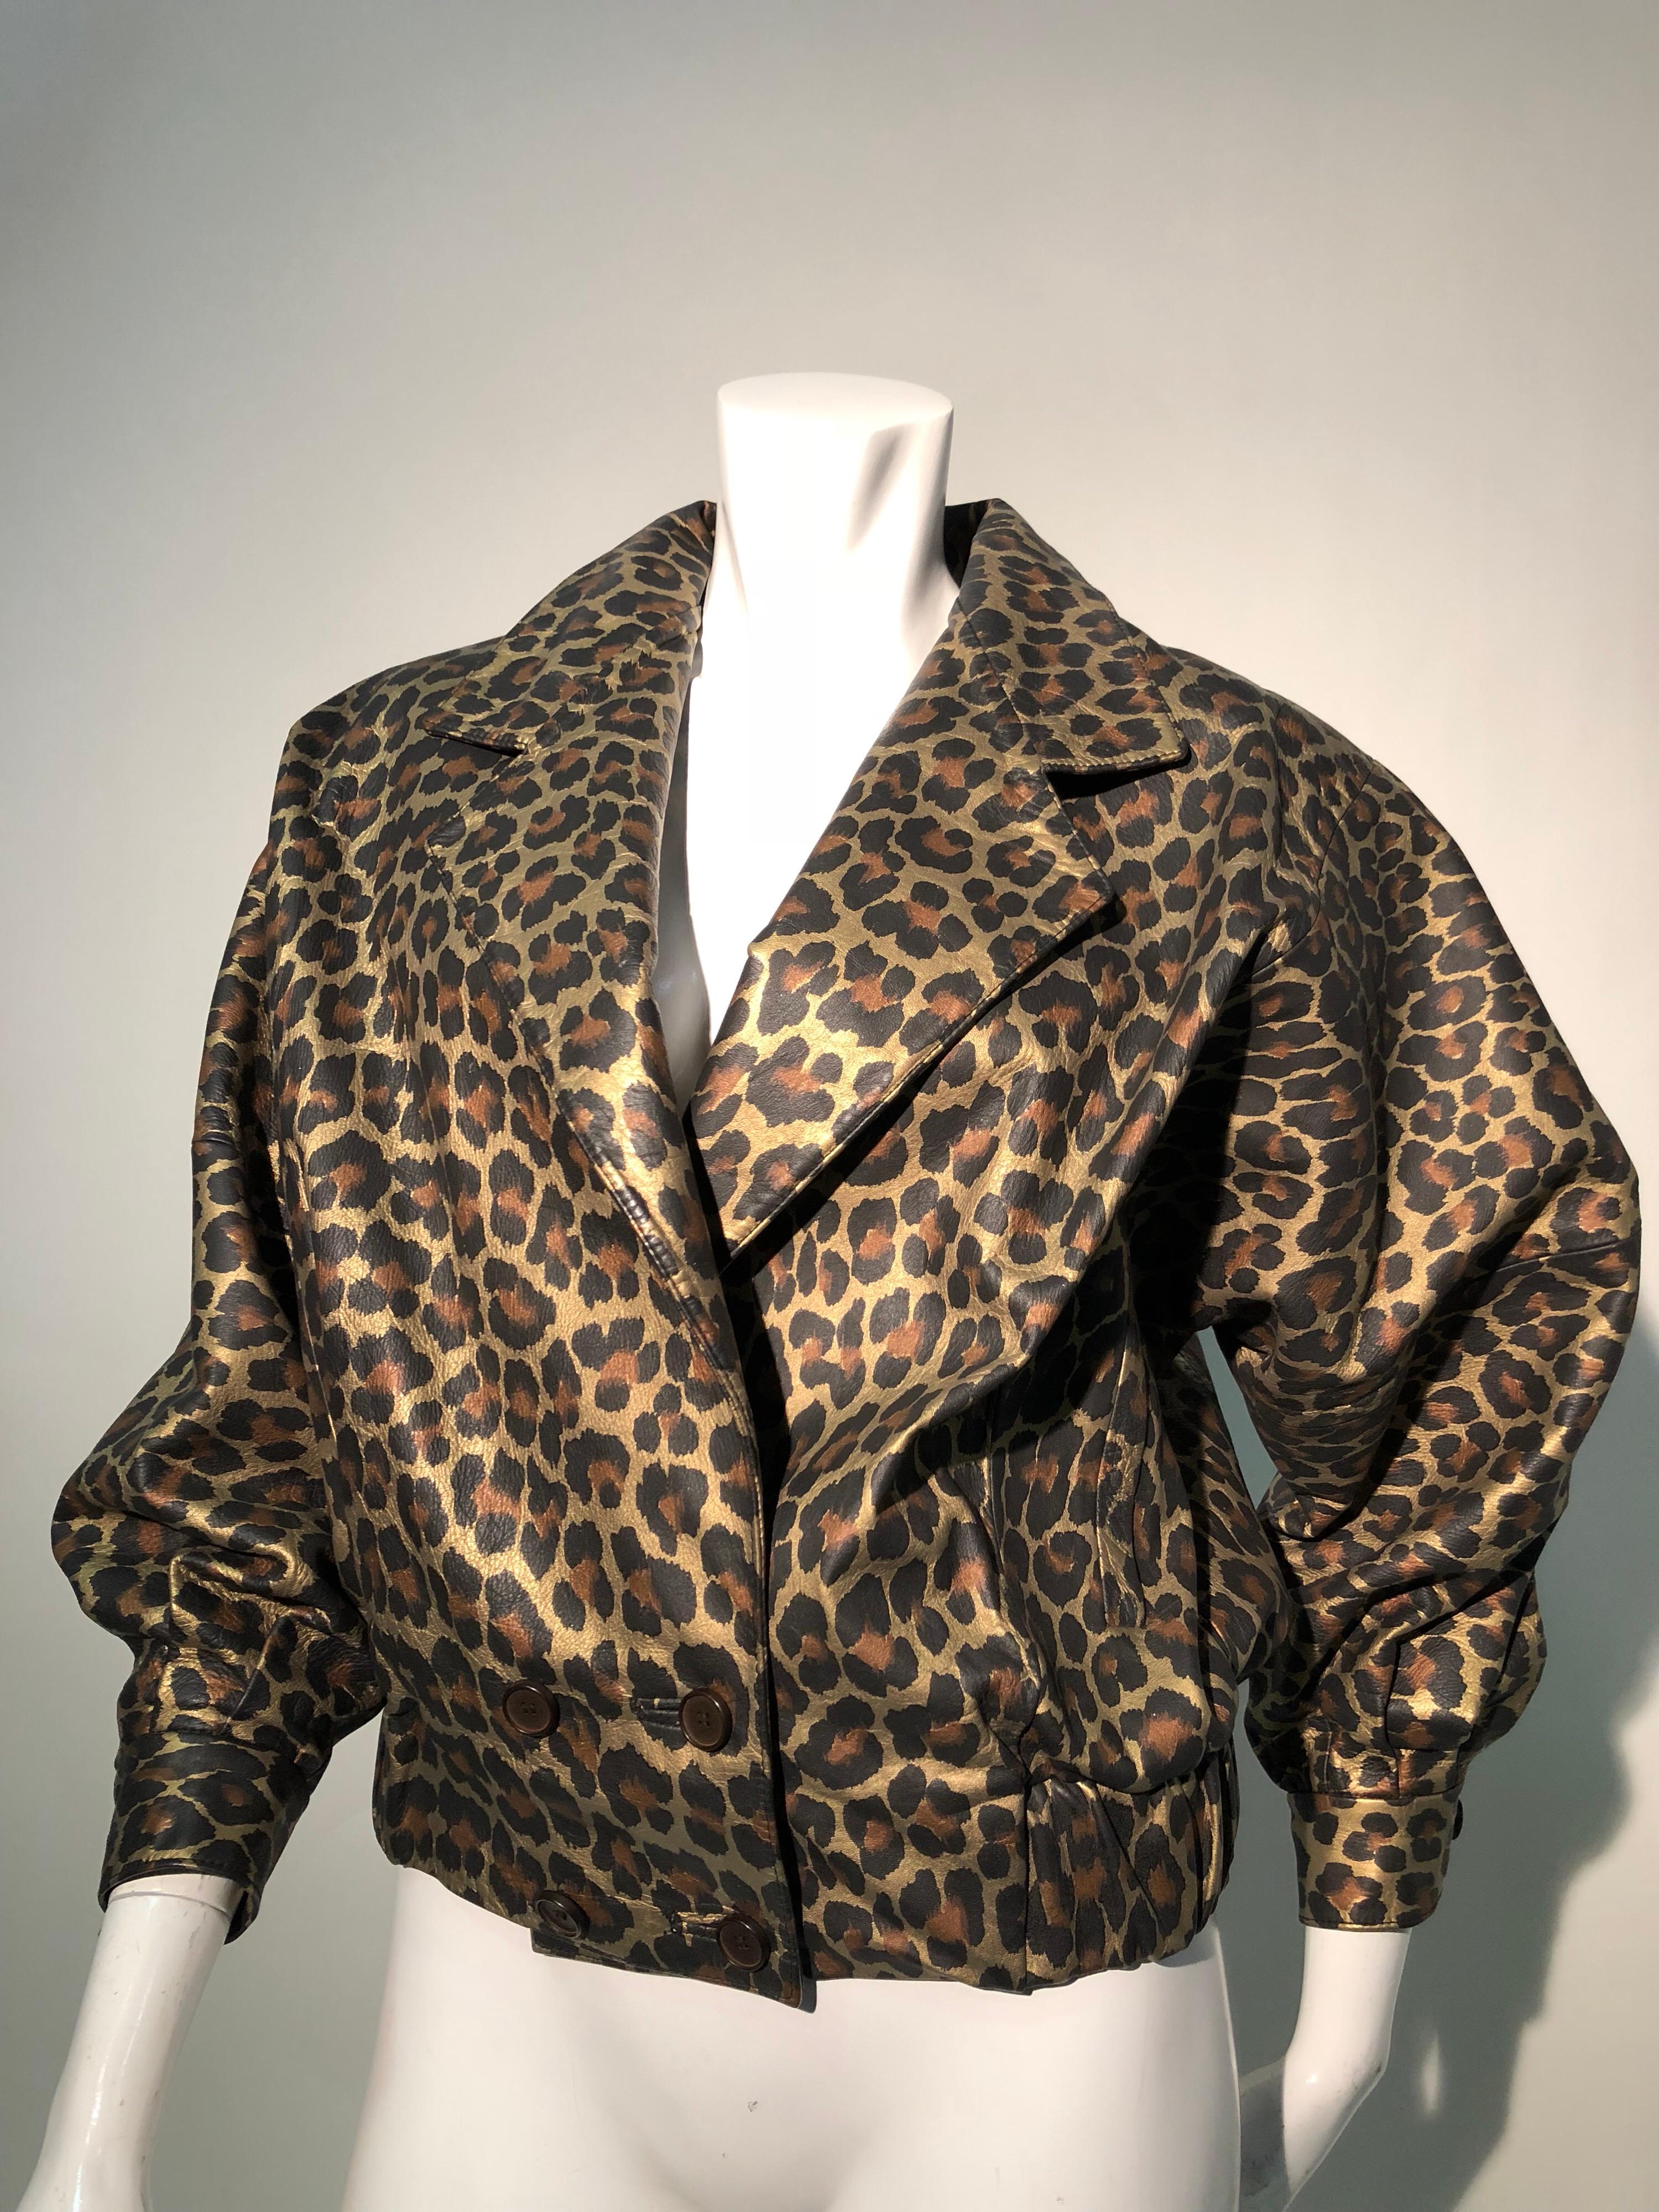 Cool, sleek, metallic leopard-print leather makes this 1980s Andrea Pfister banded-waist bomber jacket a real head-turner! Blouson style body with wide collar and fitted cuffs. Double-breasted button closure. Originally sold at Amen Wardy. 